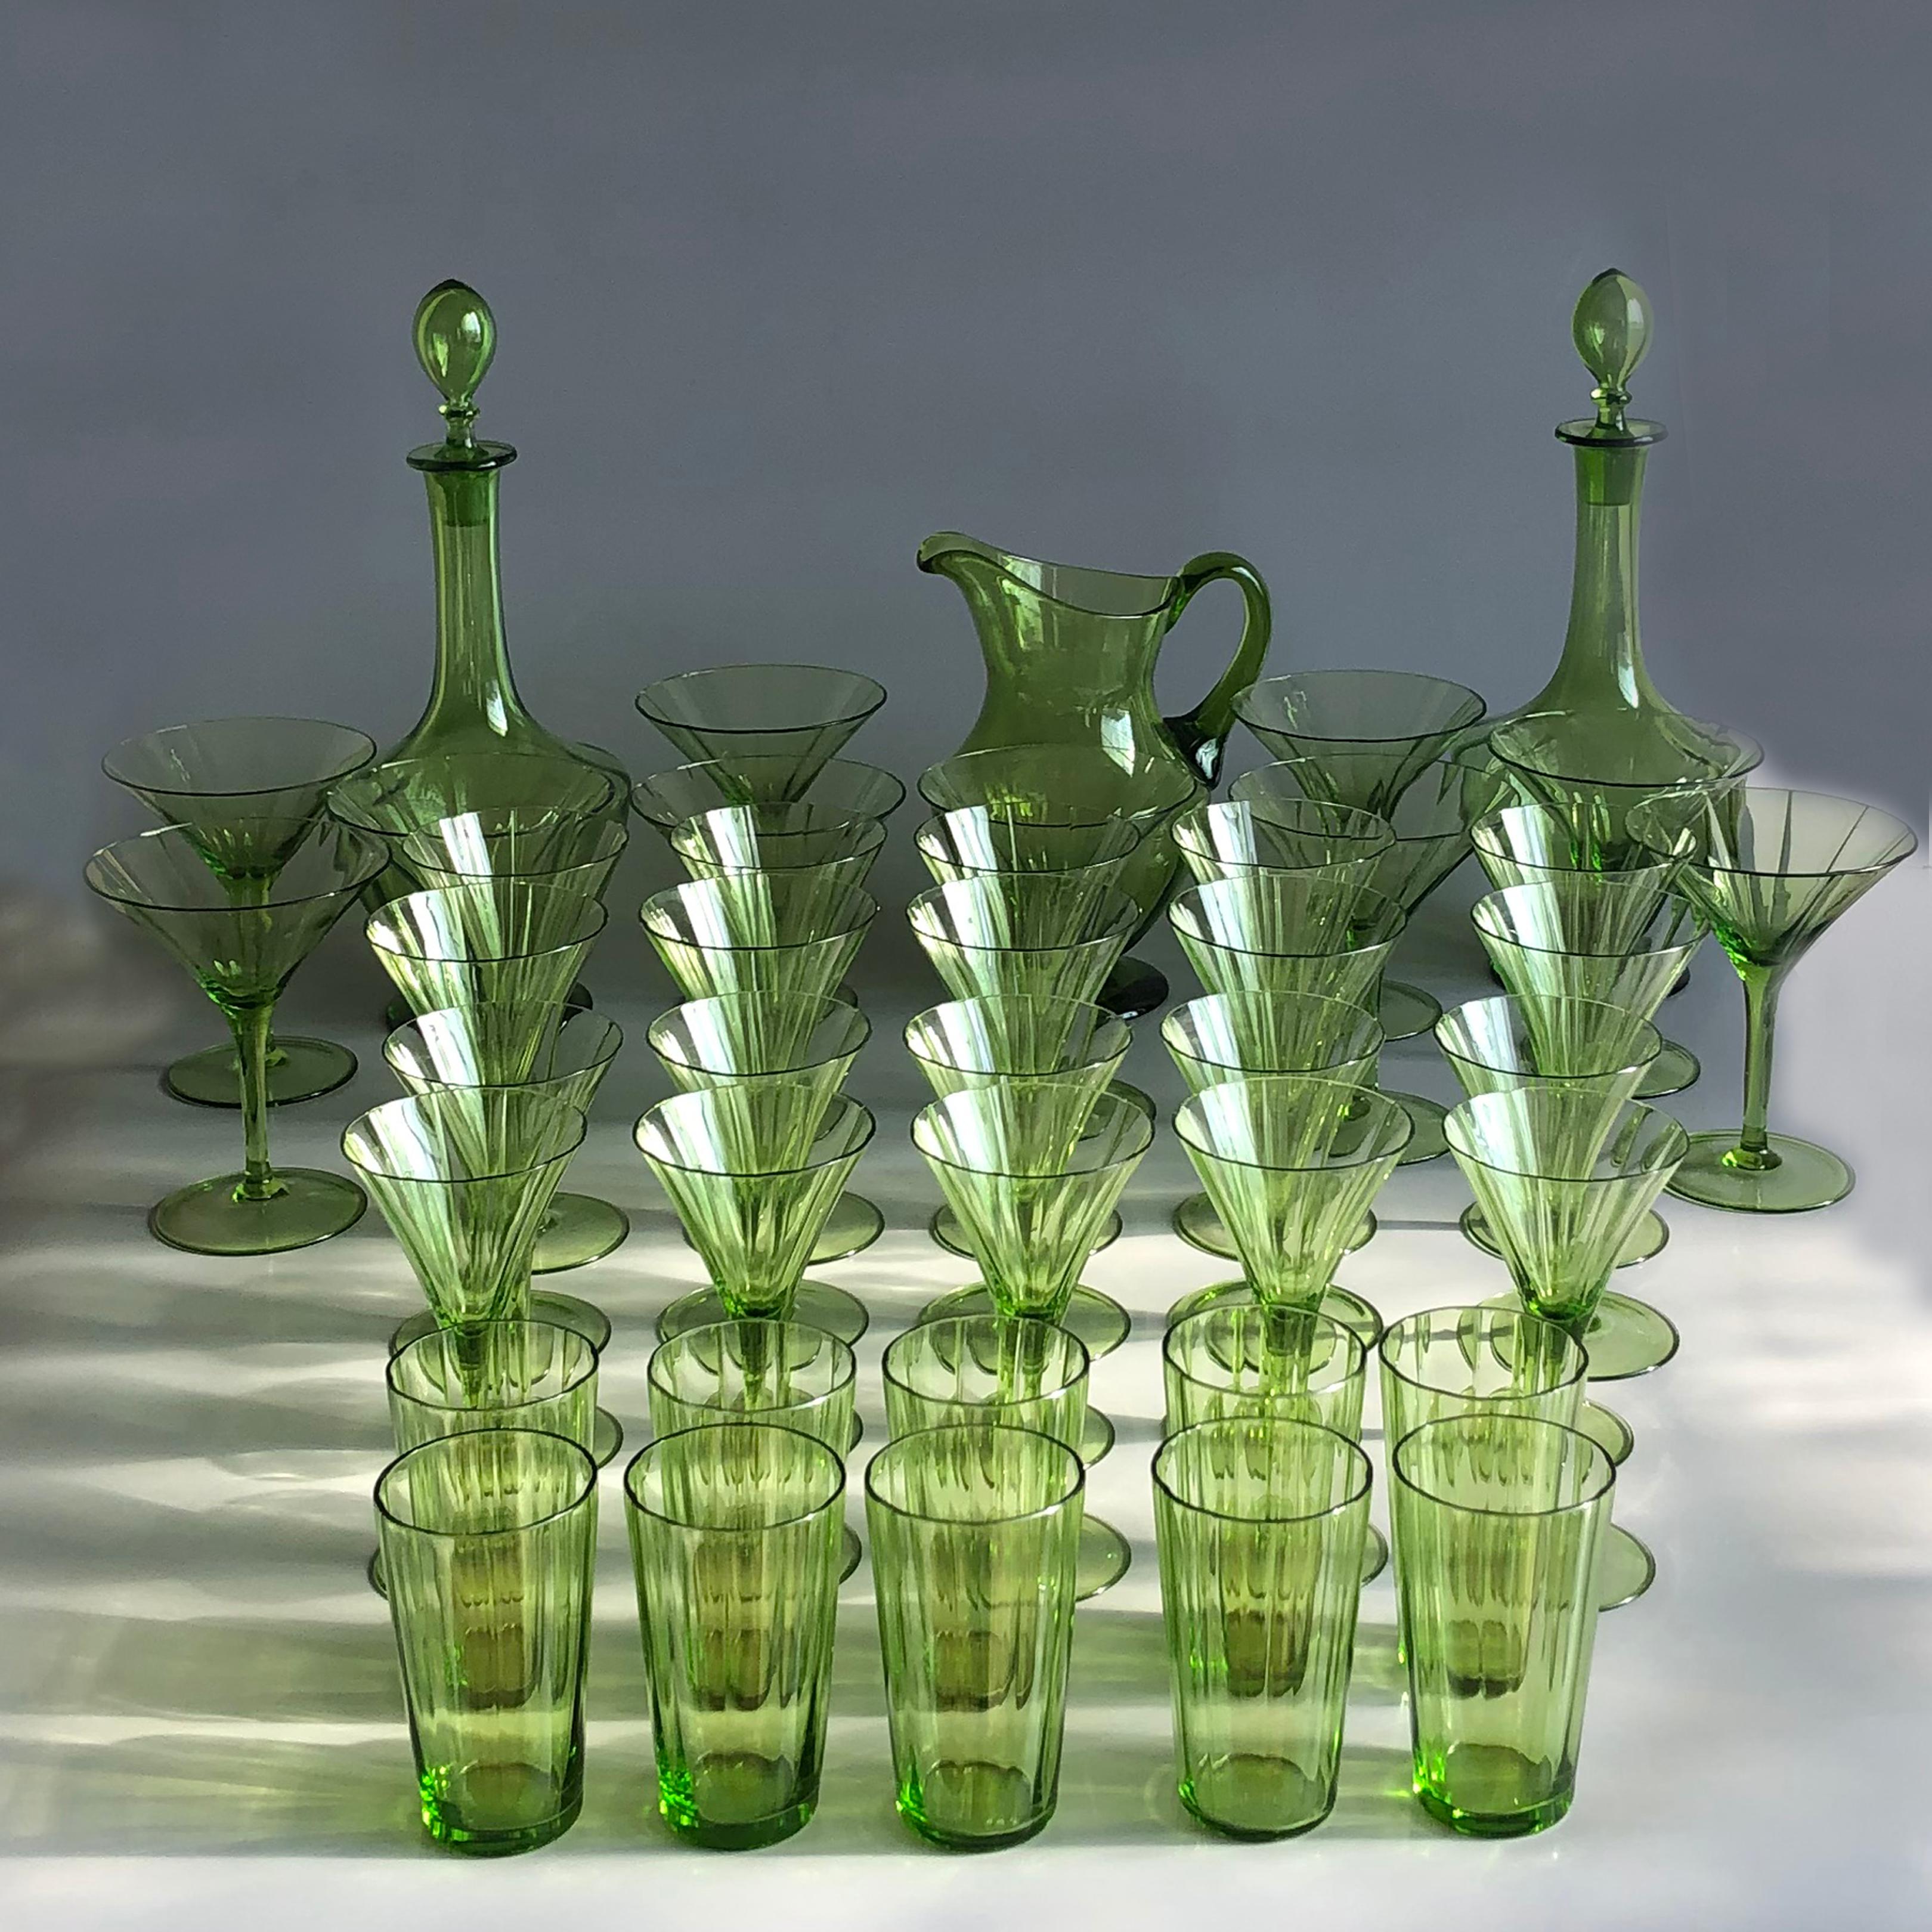 Beautifully handcrafted hand blown green glasses set consisting of 10 champagne, 10 red wine, 10 white wine and 10 water glasses together with
one water jug and two carafes with stoppers. The set comes with transport case.
The set is shipped in